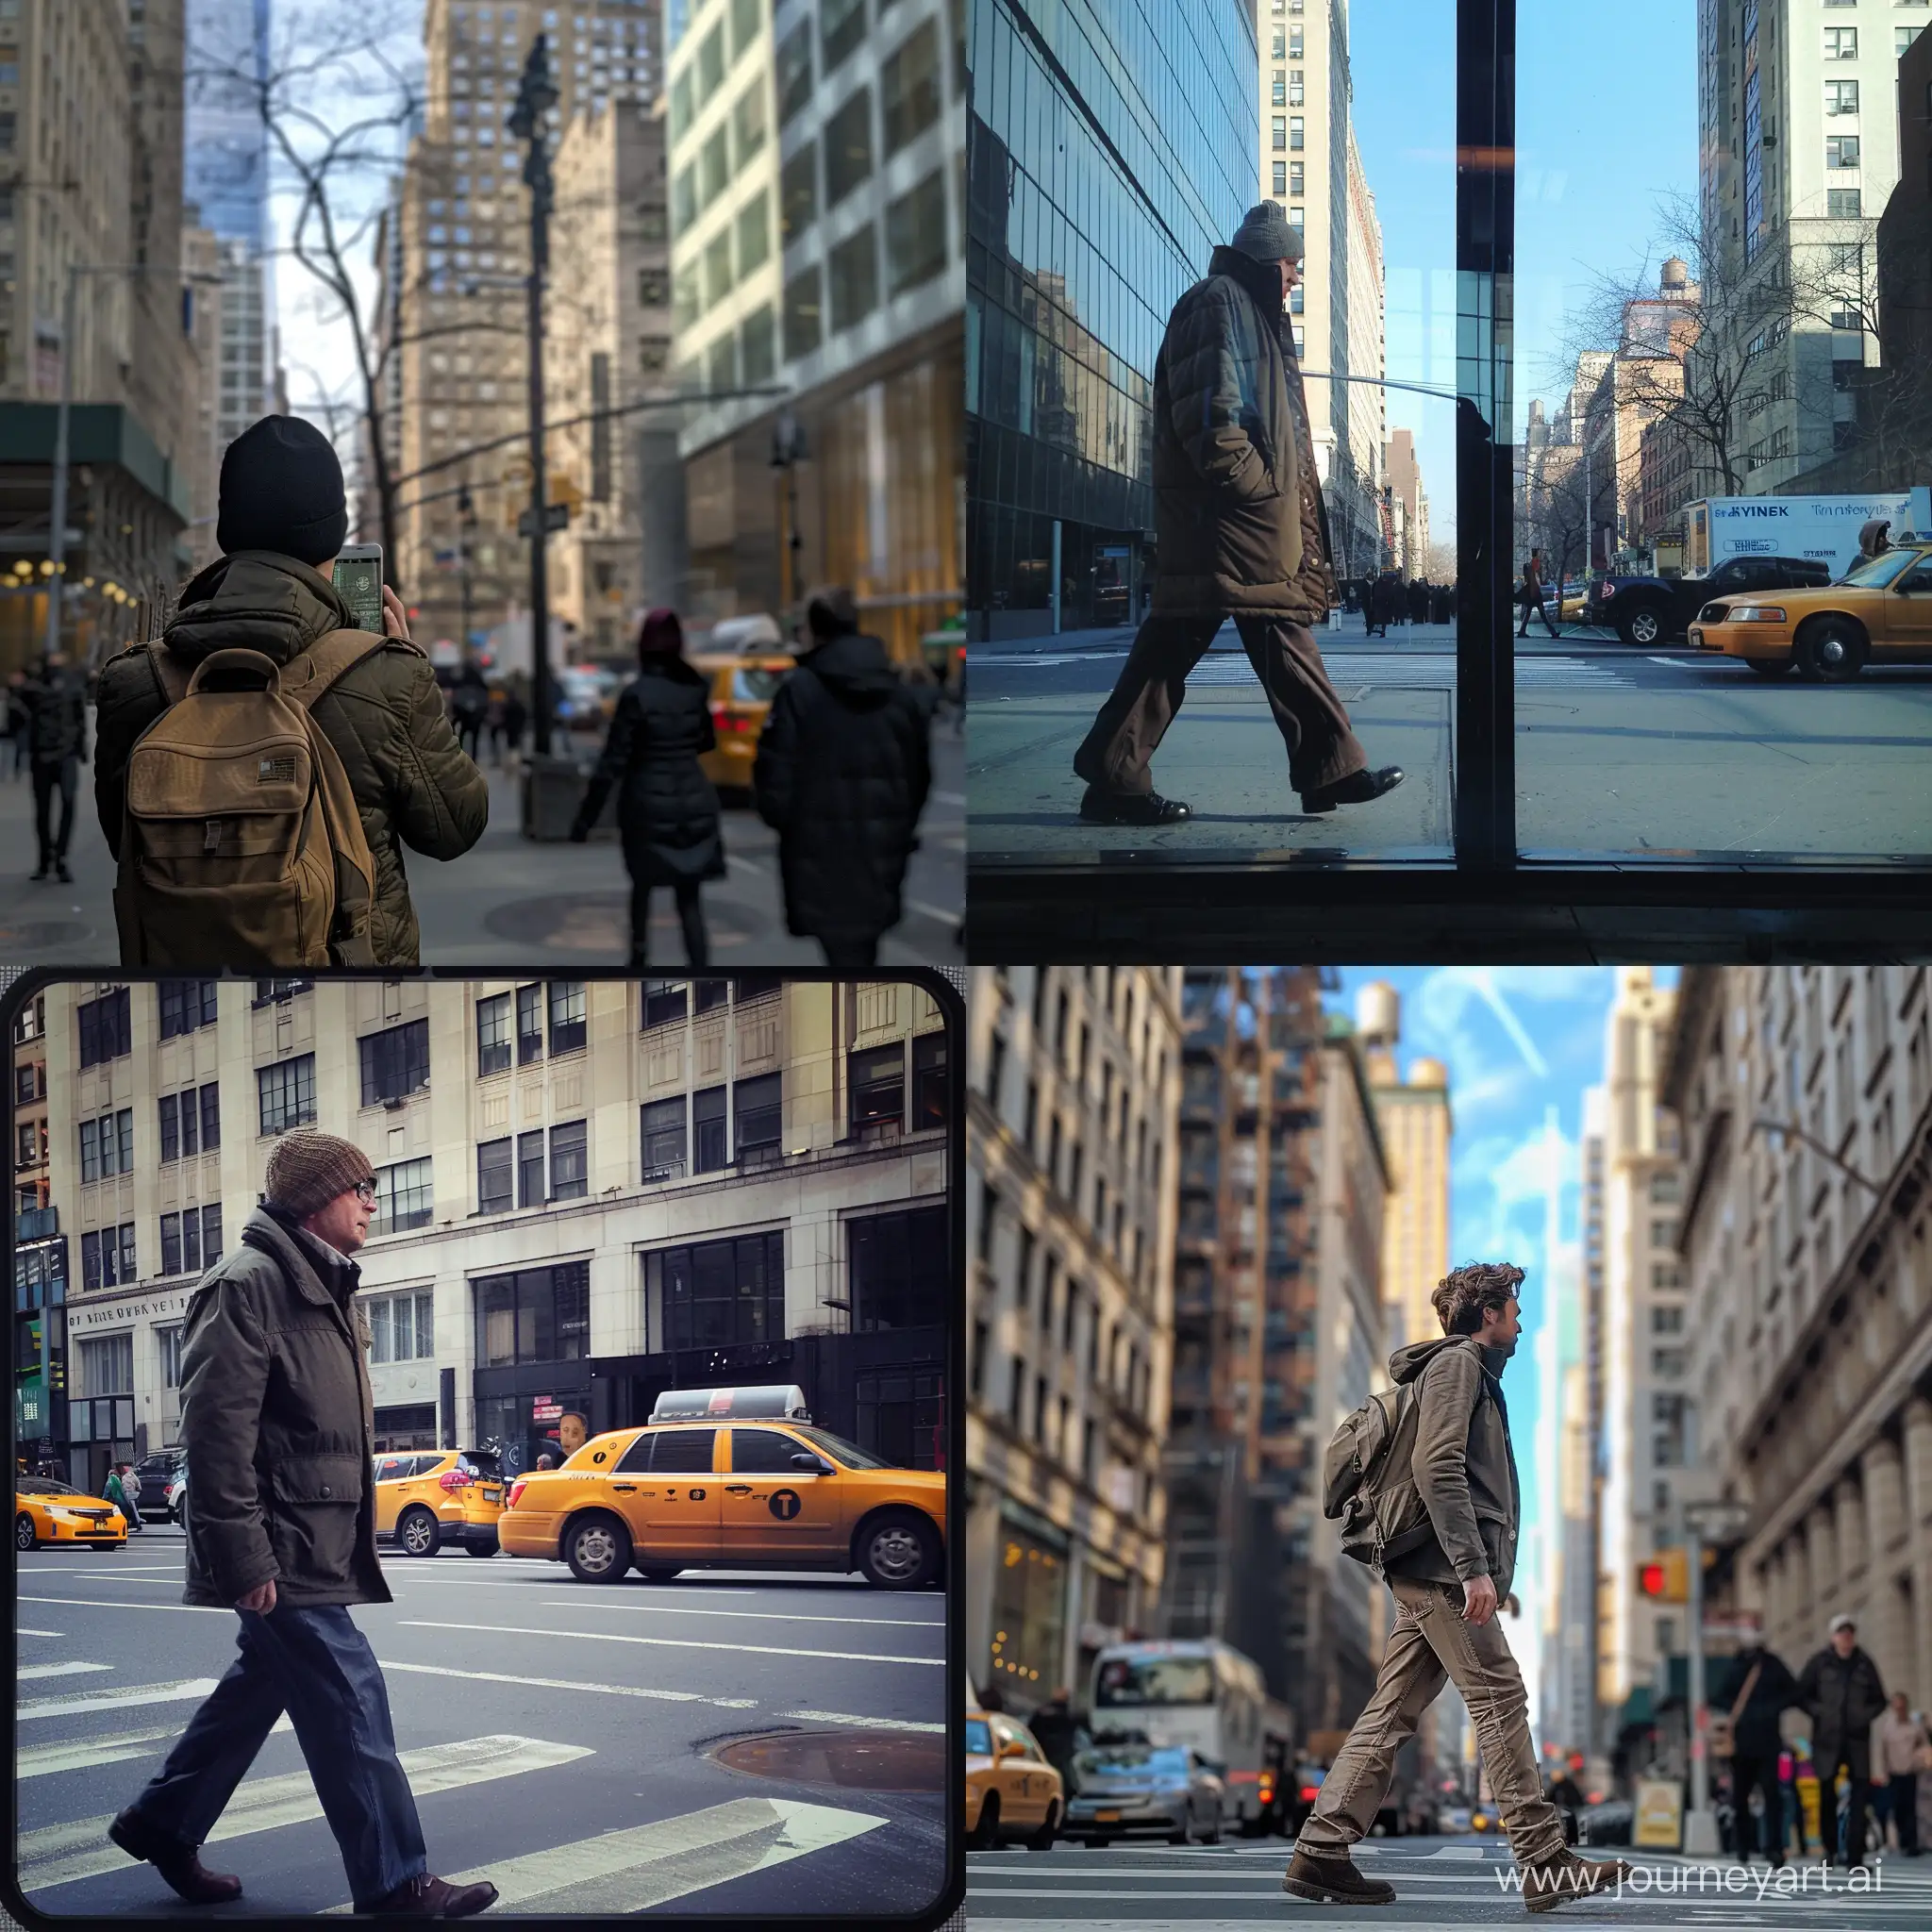 A phone photo of a guy walking in New York